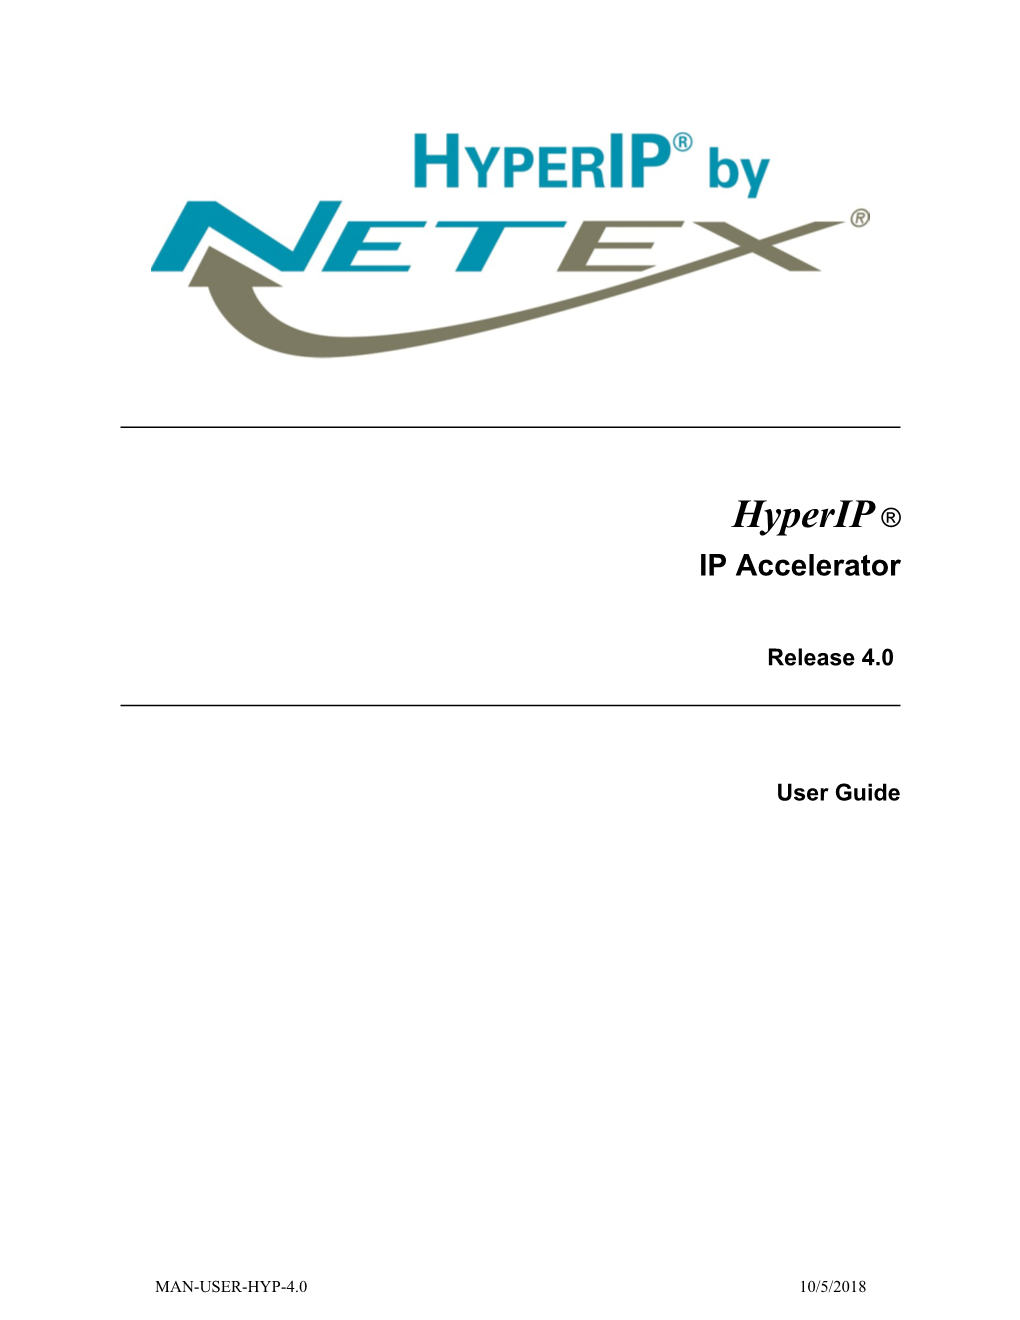 Hyperip-LE Installation Guide